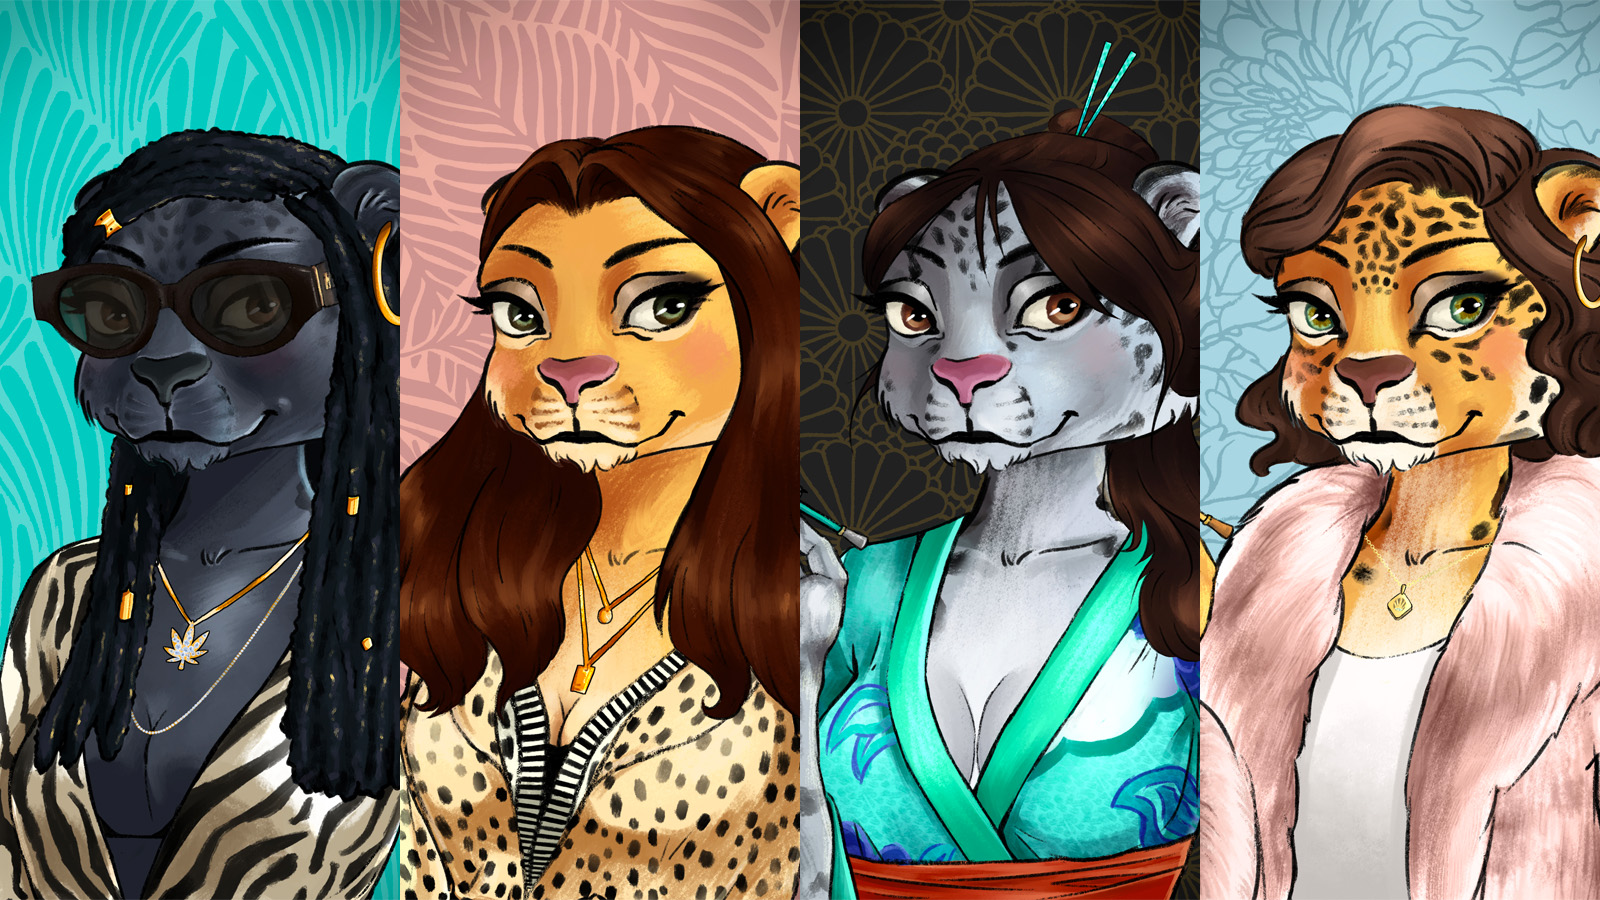 Four cats: a black panther wearing zebra print, a lion wearing leopard print, a snow leopard with a teal kimono, and a jaguar with a pink coat.